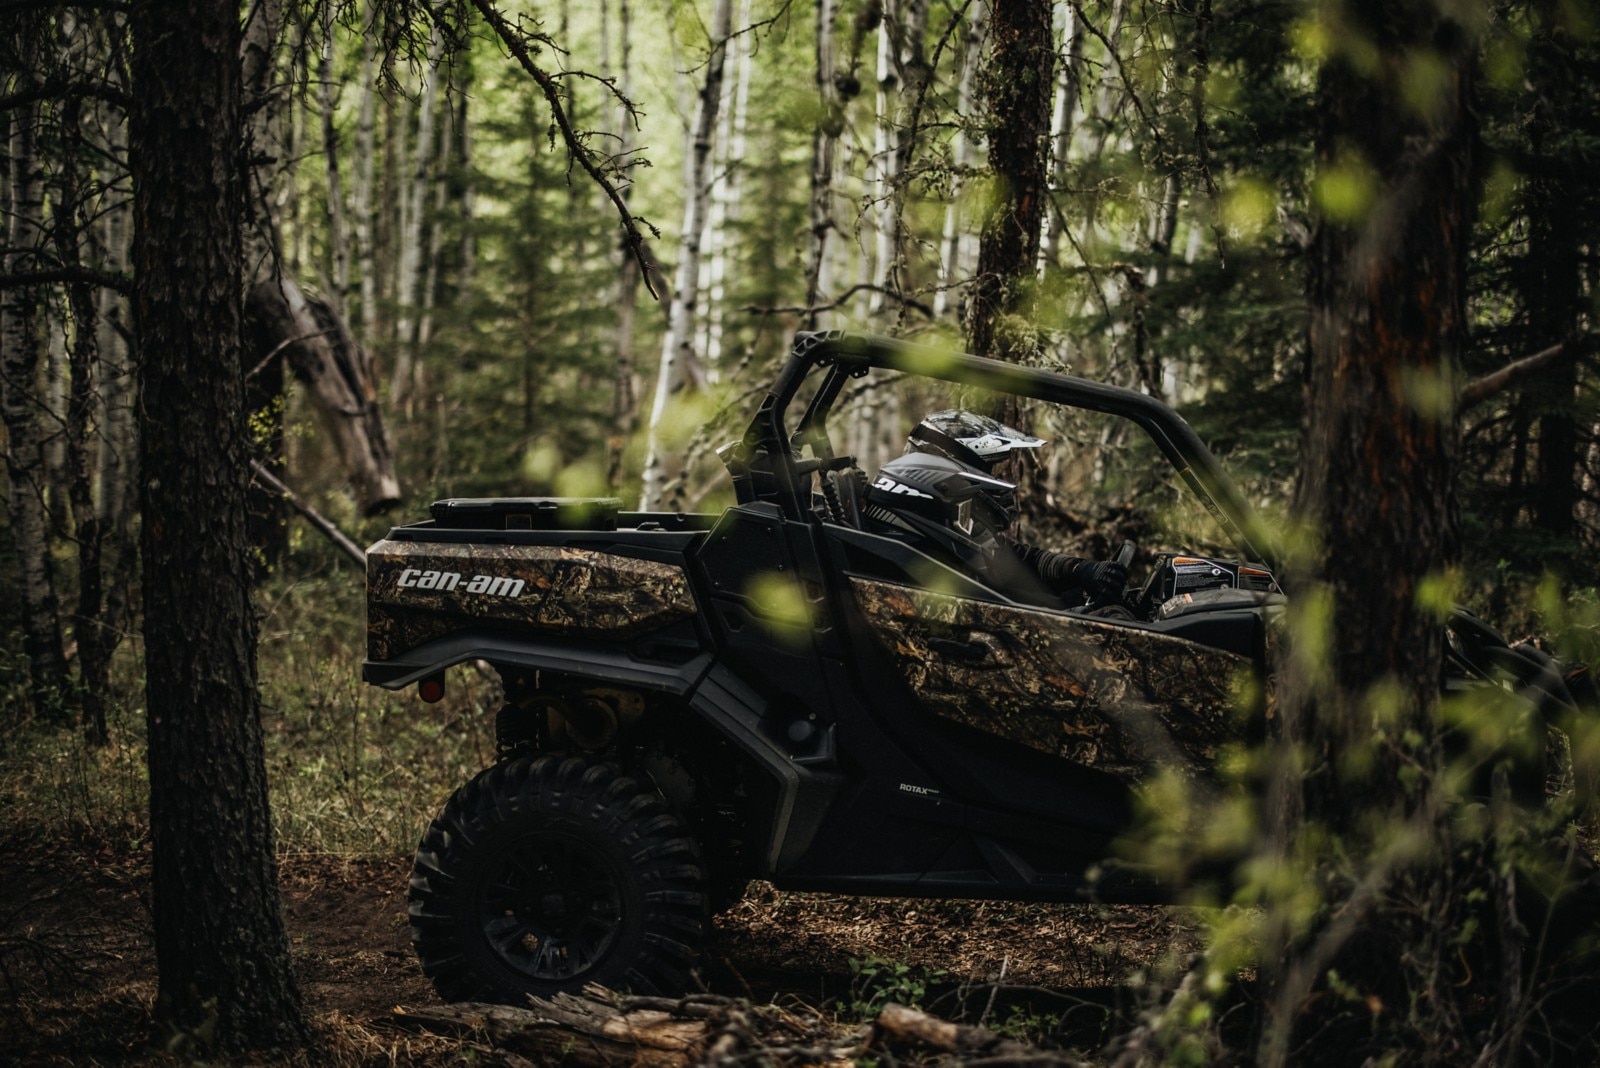 SxS side profile with two riders in the woods